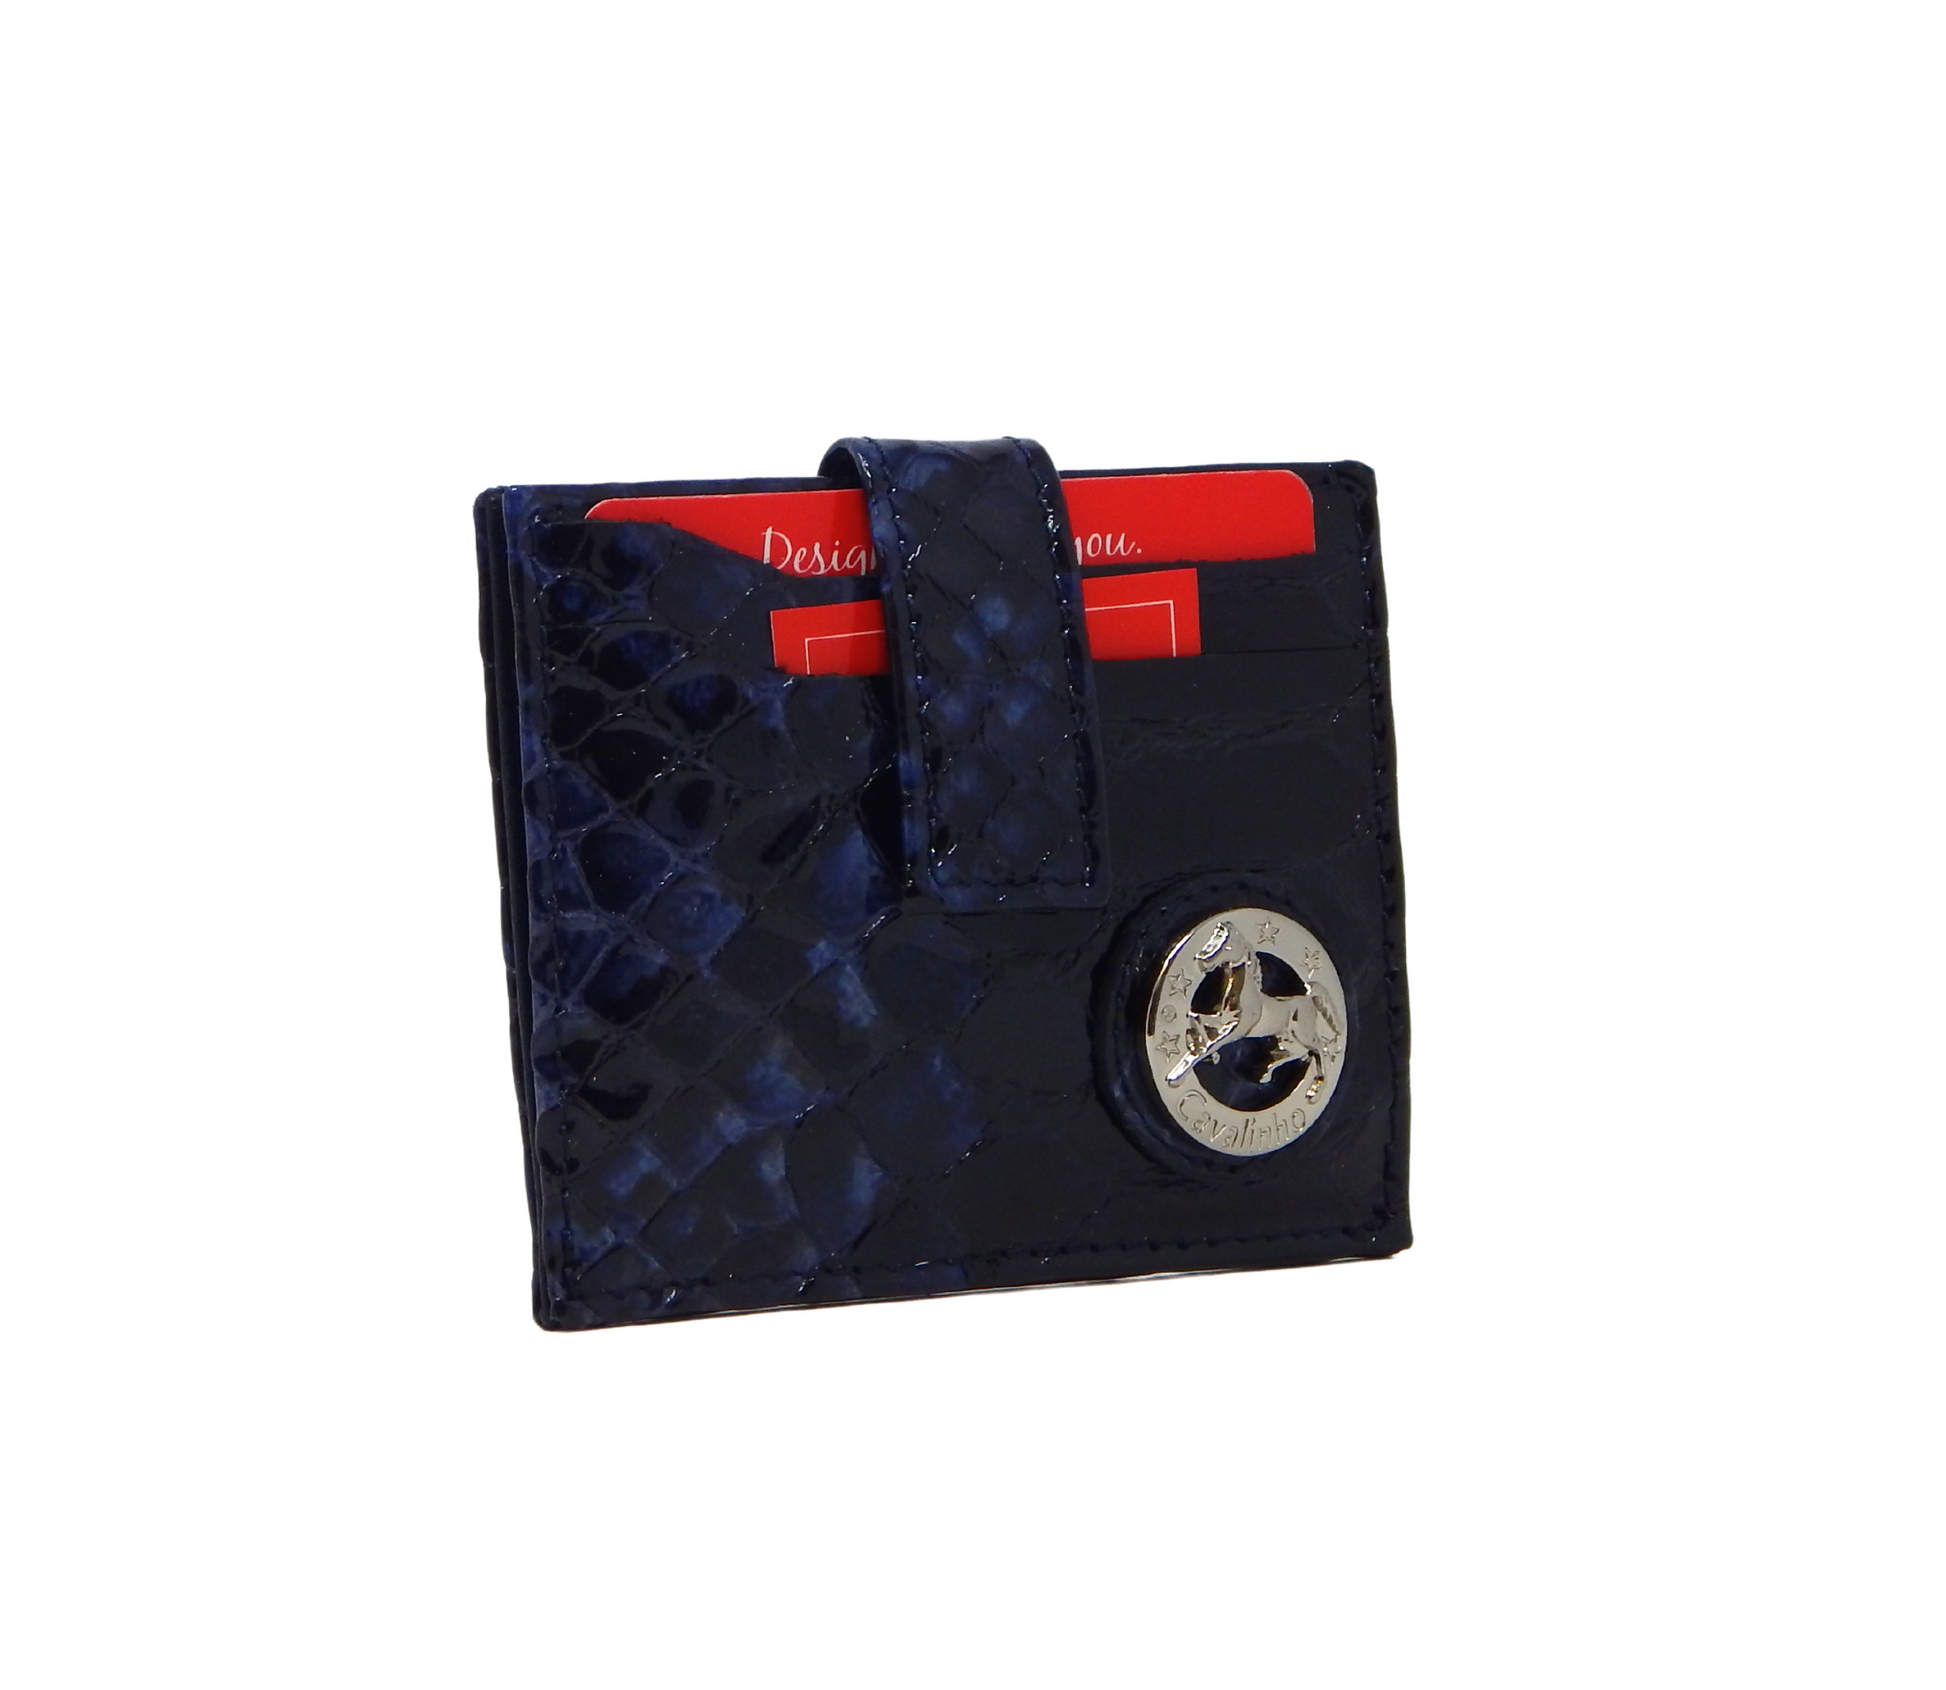 #color_ Navy | Cavalinho Gallop Patent Leather Card Holder Wallet - Navy - 28170576.03_2